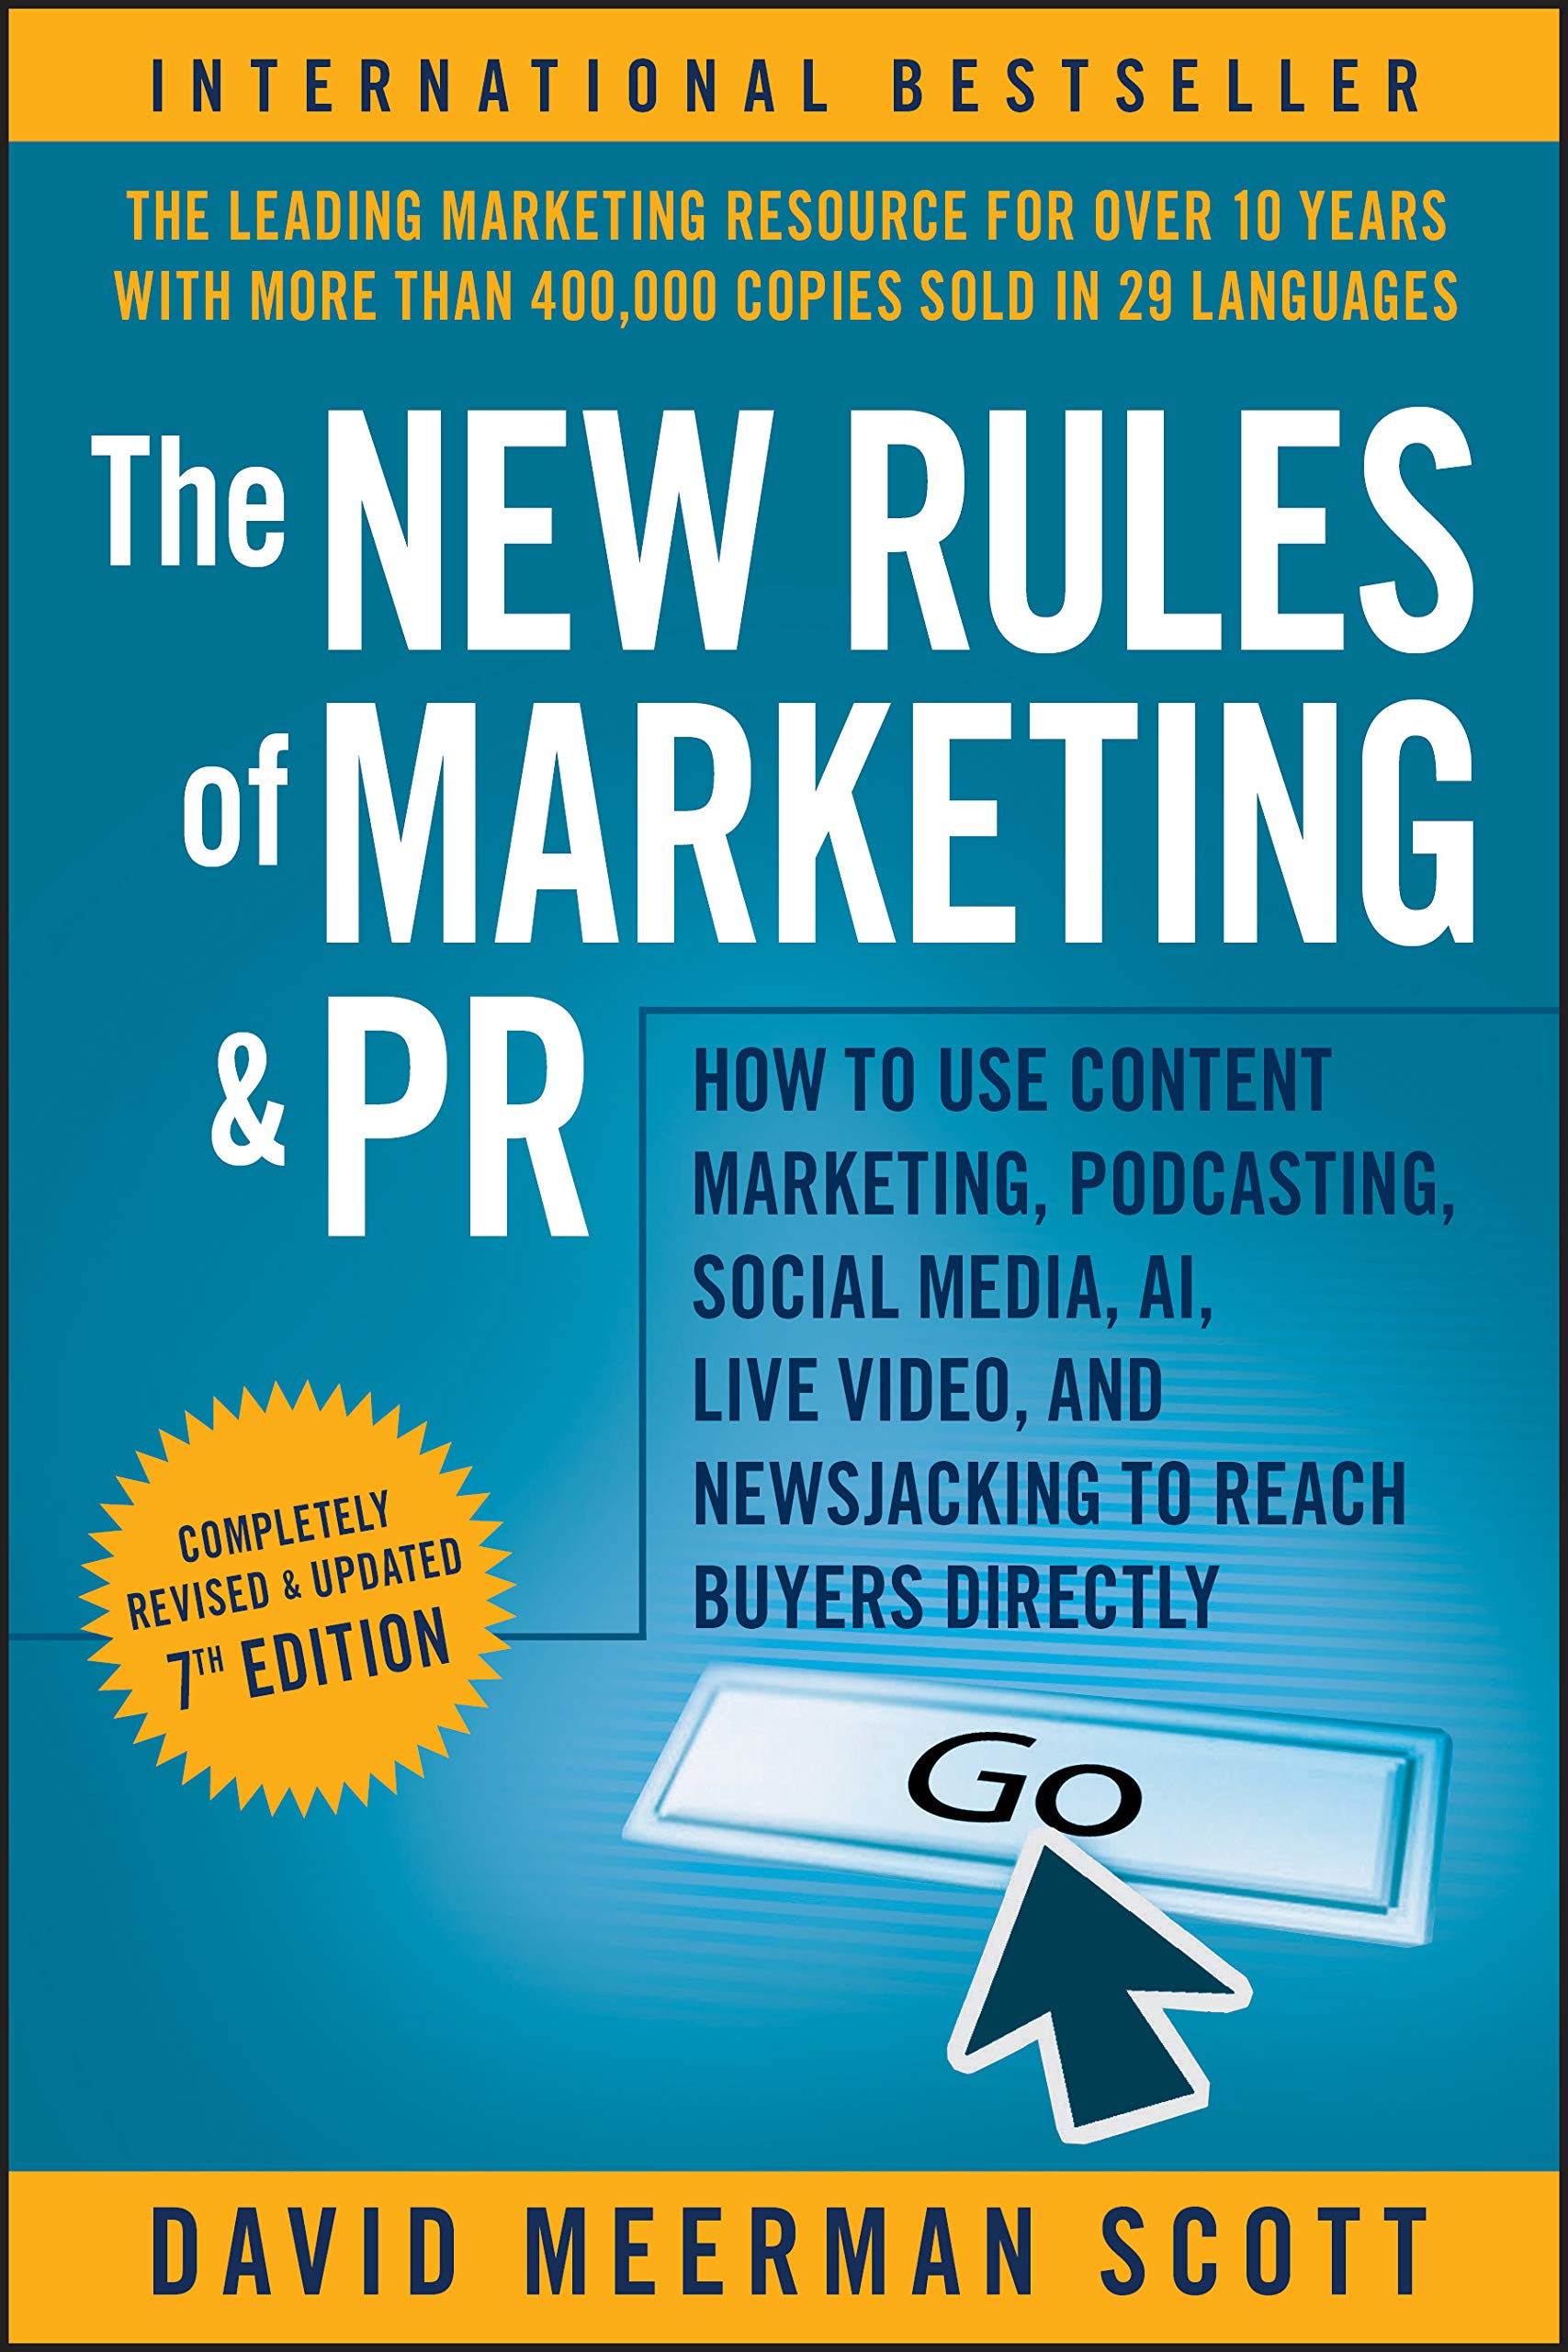 The New Rules of Marketing & PR: How to Use Content Marketing, Podcasting, Social Media, AI, Live Video, and Newsjacking to Reach Buyers Directly